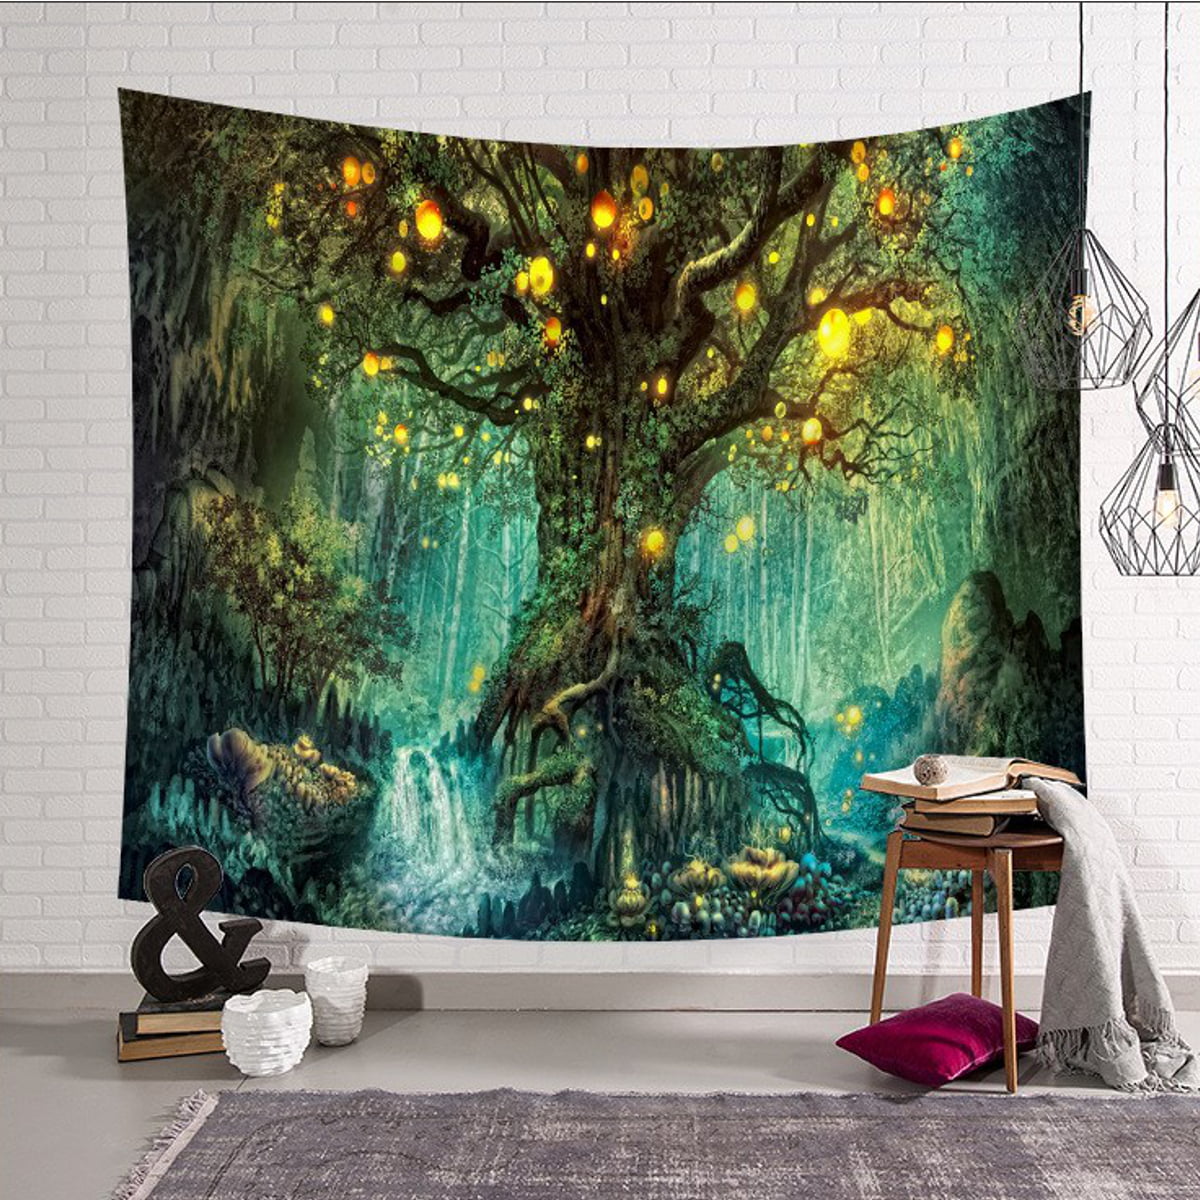 Forest Fall Wall Hanging Tapestry Psychedelic Bedroom Home Decoration 